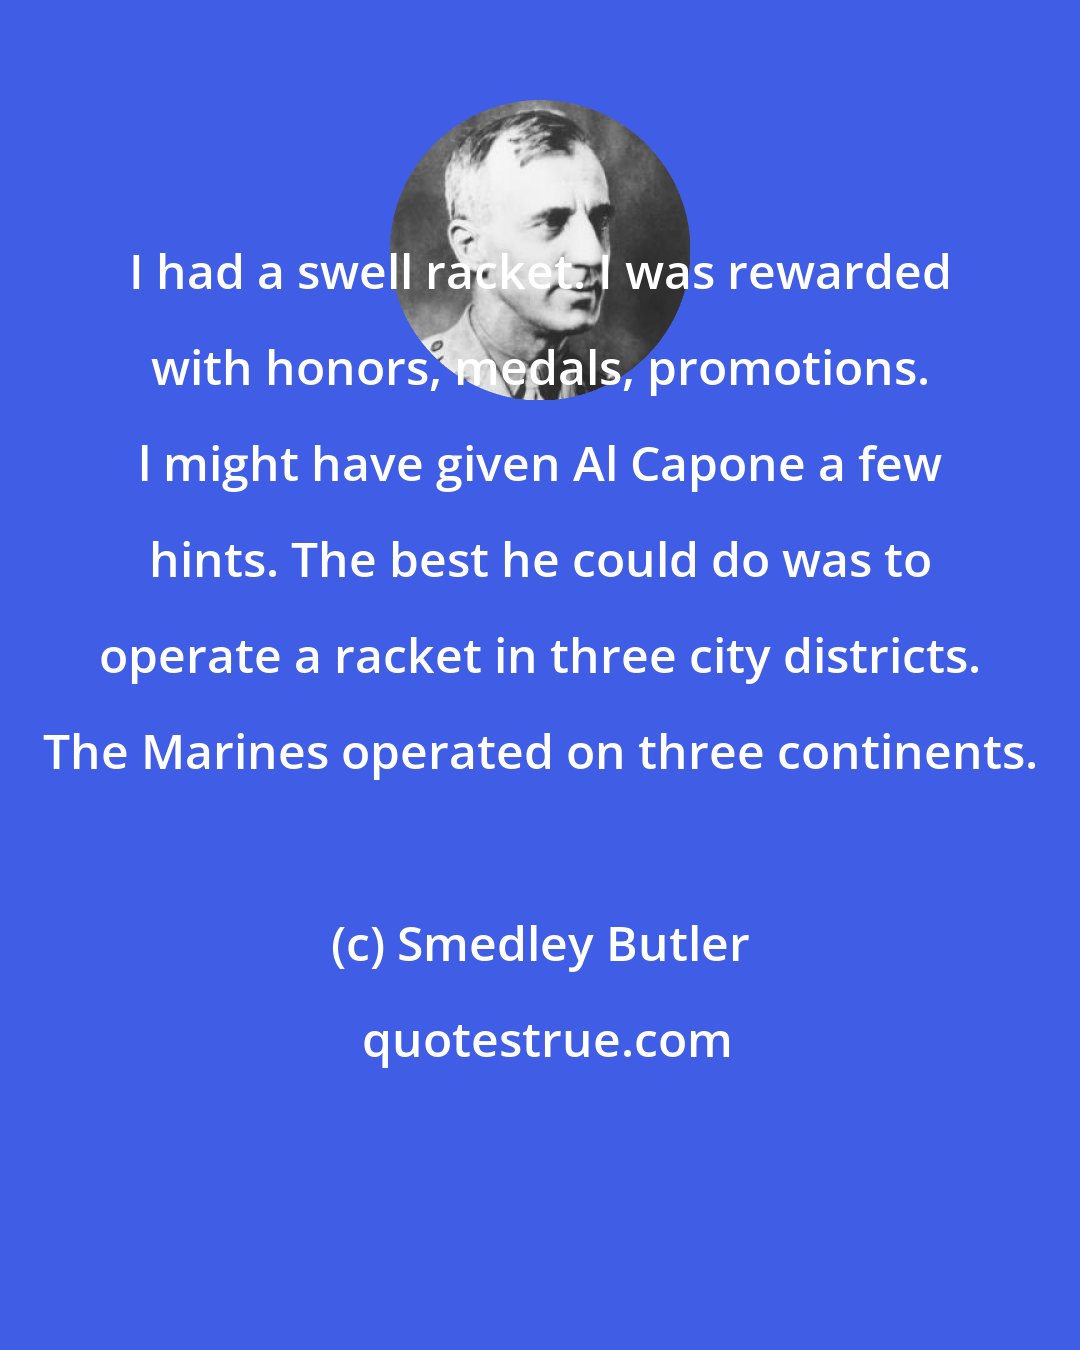 Smedley Butler: I had a swell racket. I was rewarded with honors, medals, promotions. l might have given Al Capone a few hints. The best he could do was to operate a racket in three city districts. The Marines operated on three continents.